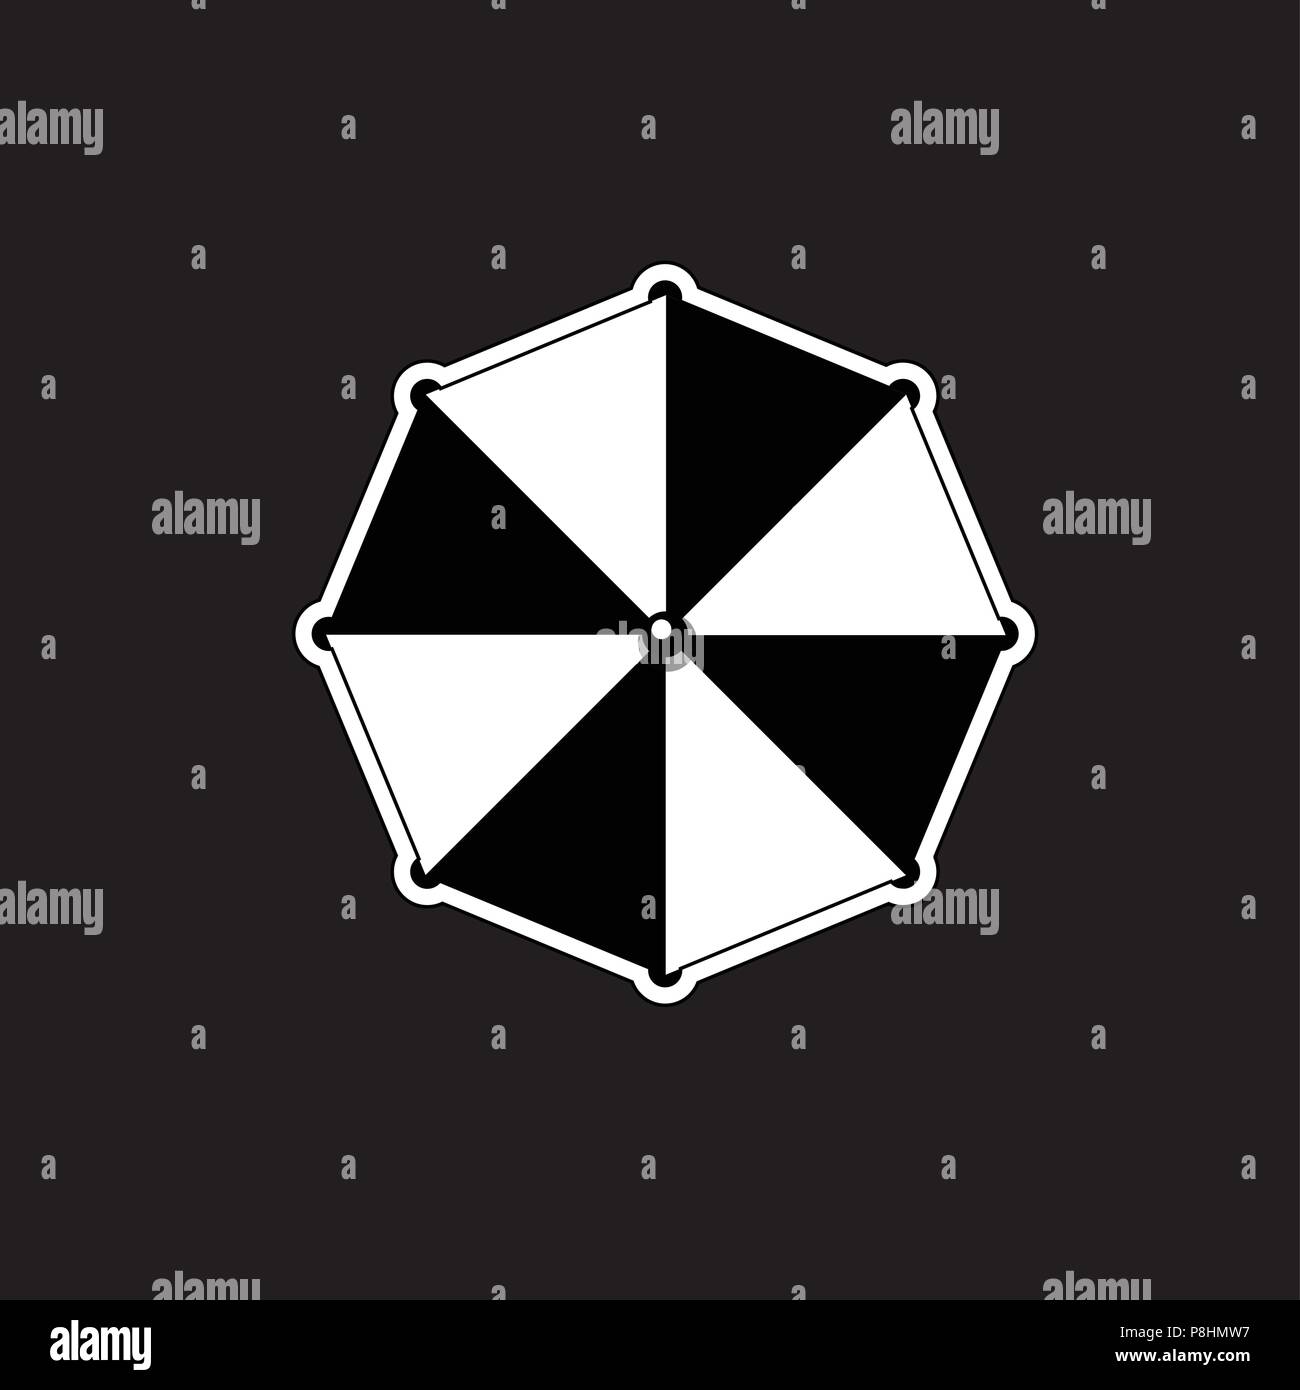 Vector black and white silhouette illustration of beach striped umbrella top view icon isolated on black background. Stock Vector